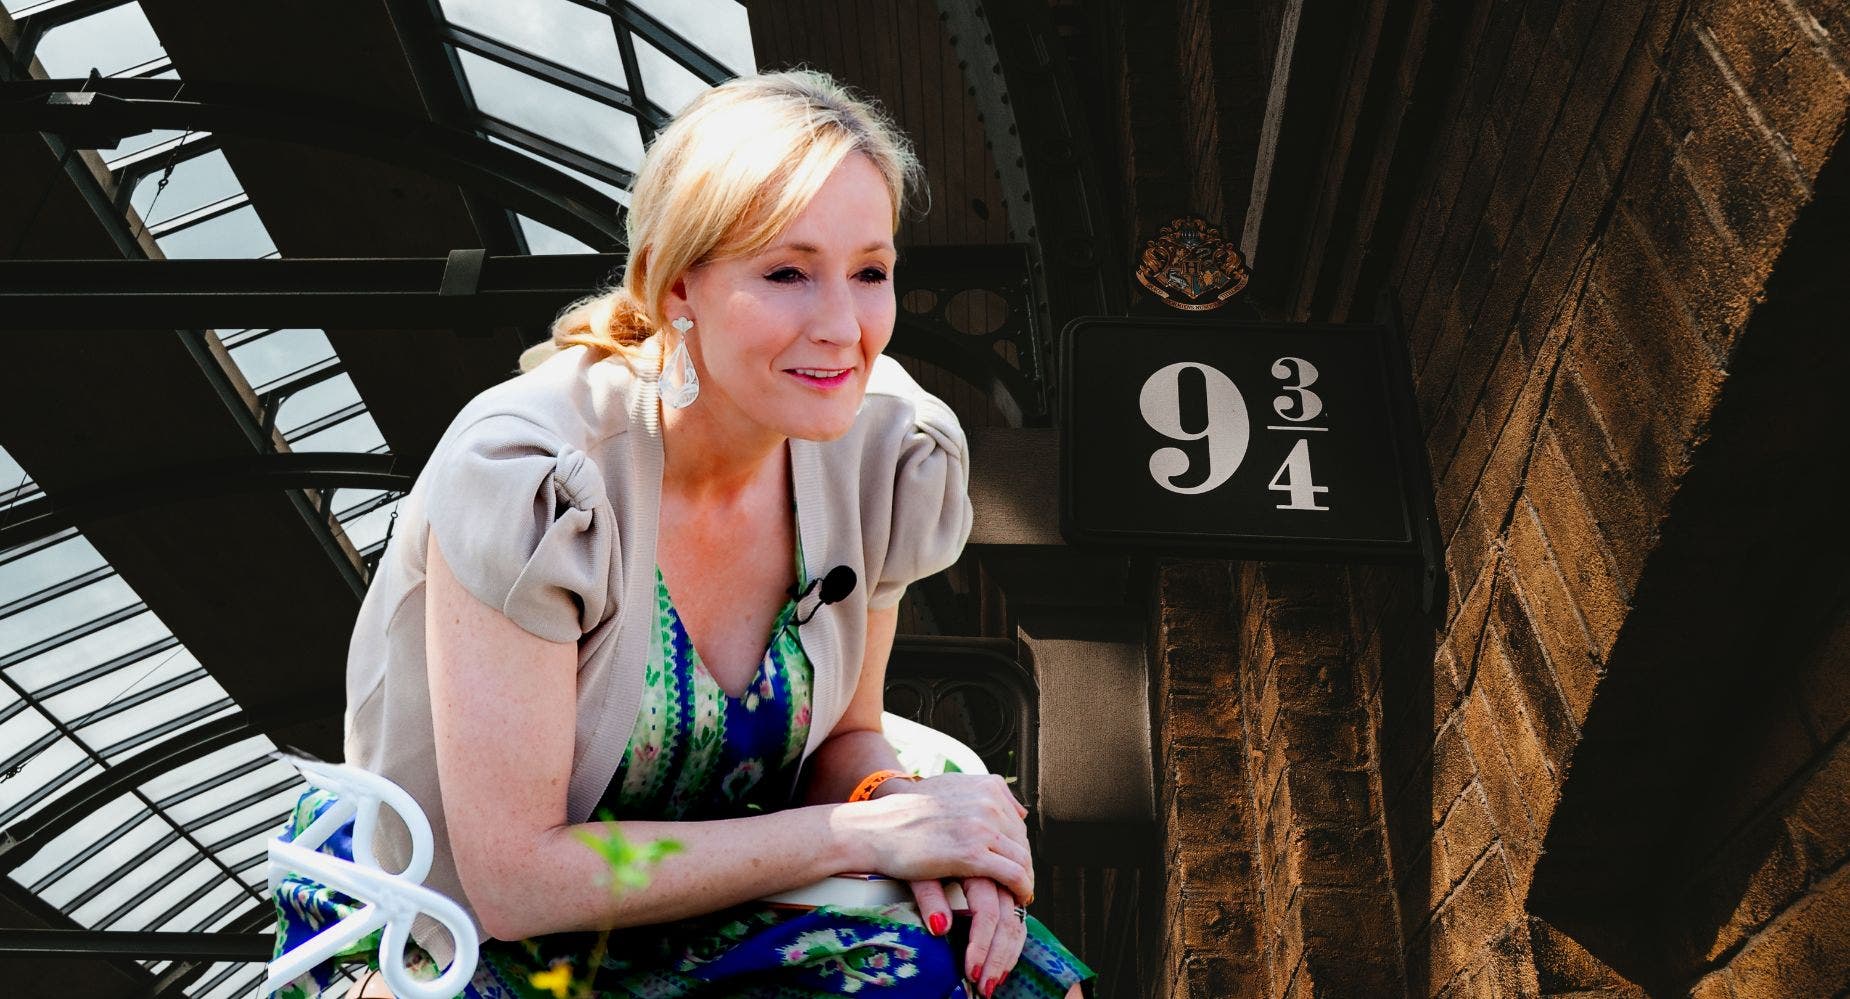 Royalty Checks Help Her Sleep: Harry Potter Author J.K. Rowling Brushes Off Fan Backlash